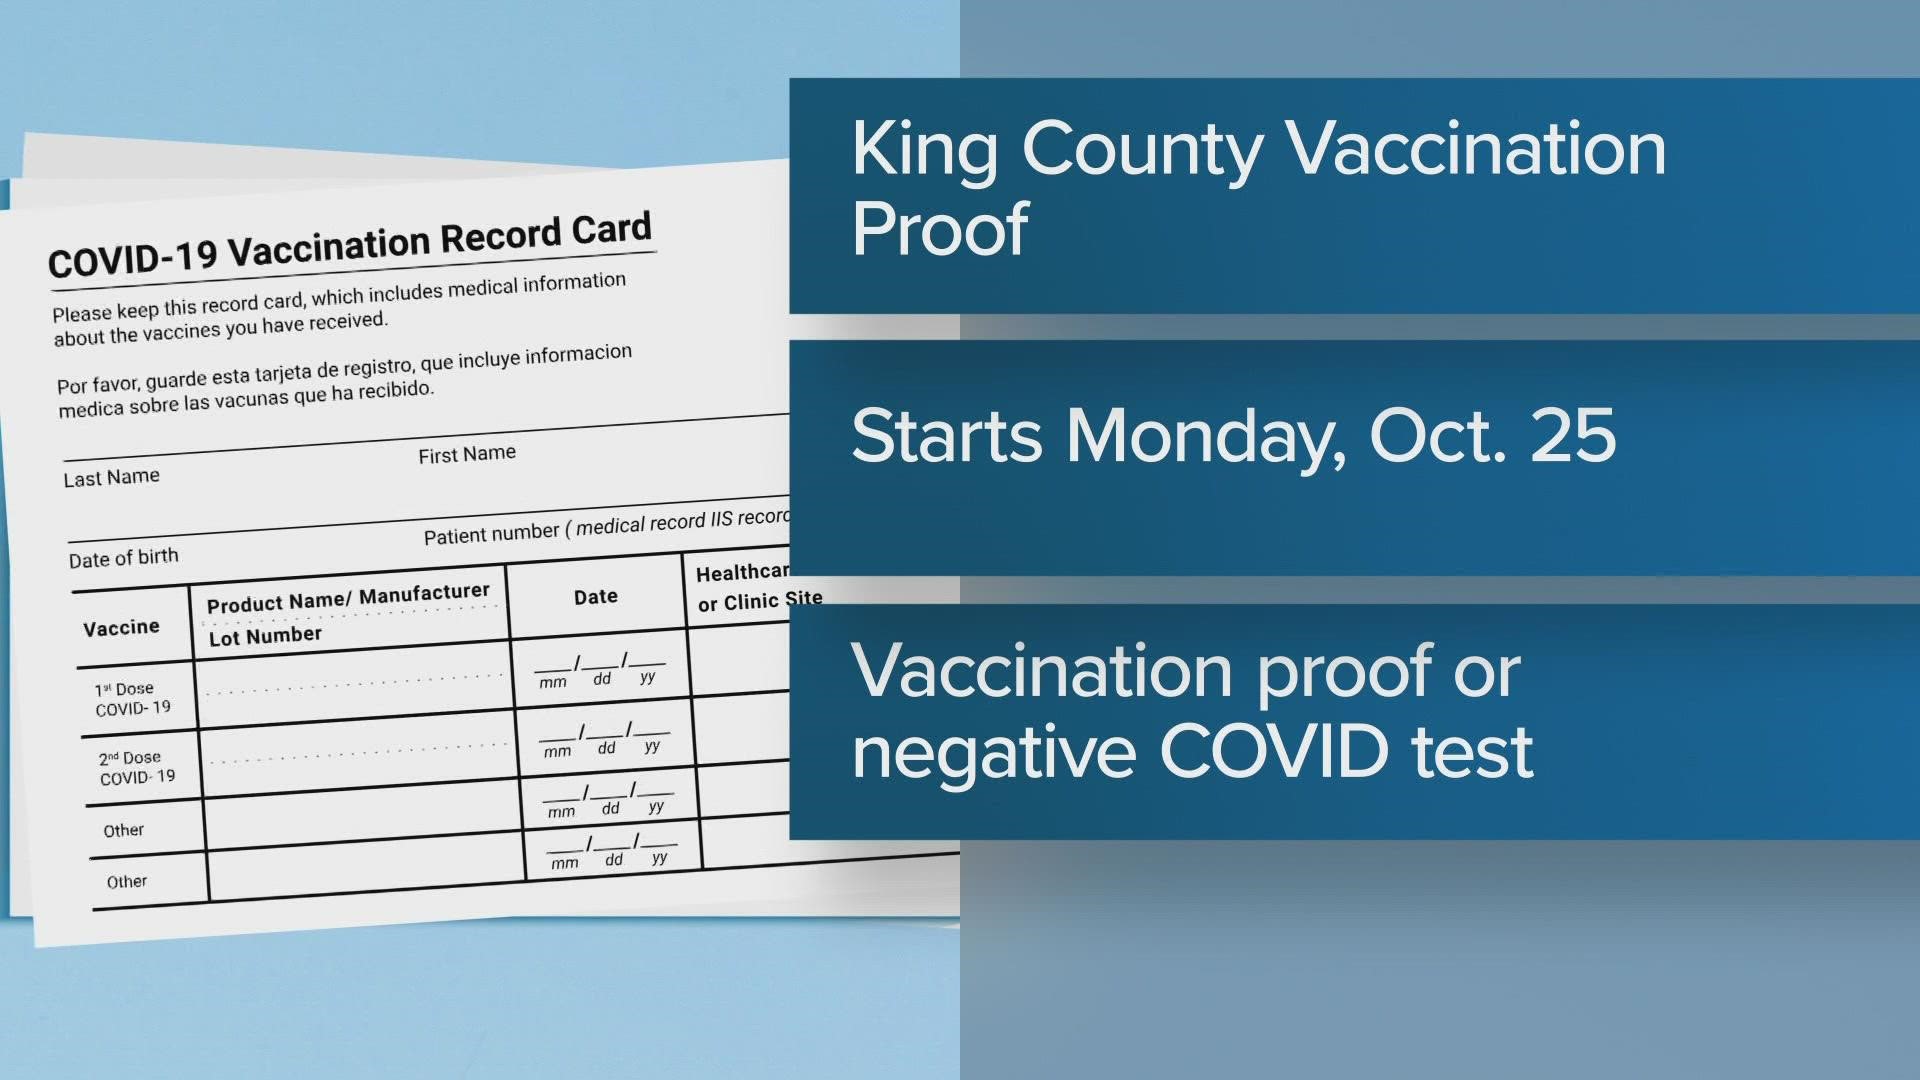 To enjoy things like indoor dining, gyms and entertainment, patrons will need to present COVID-19 vaccine verification in King County beginning Monday.